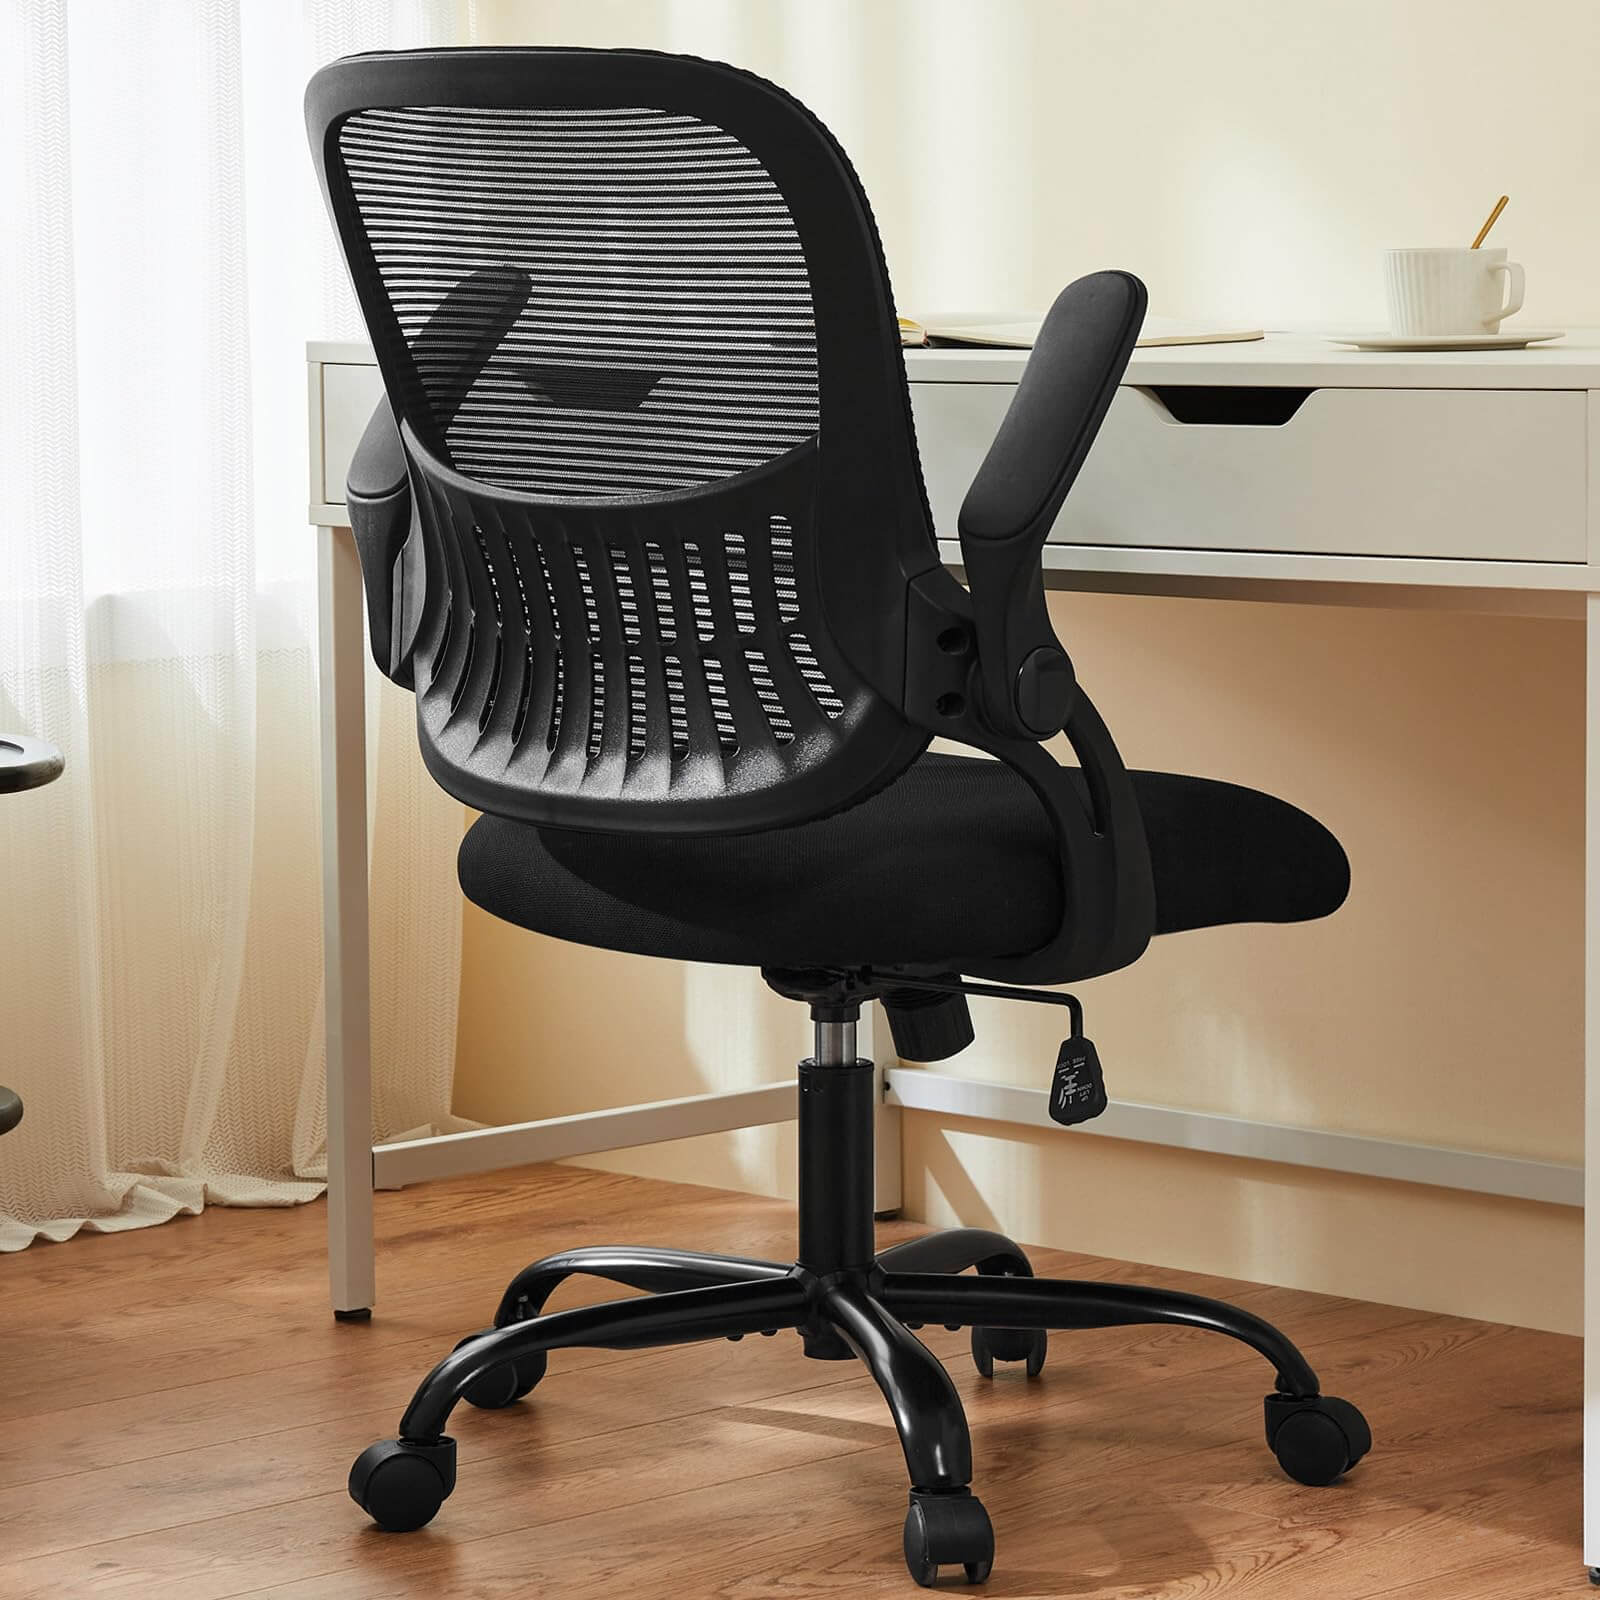 mesh-office-chairs#Color_Black#Quantity_1 Chair